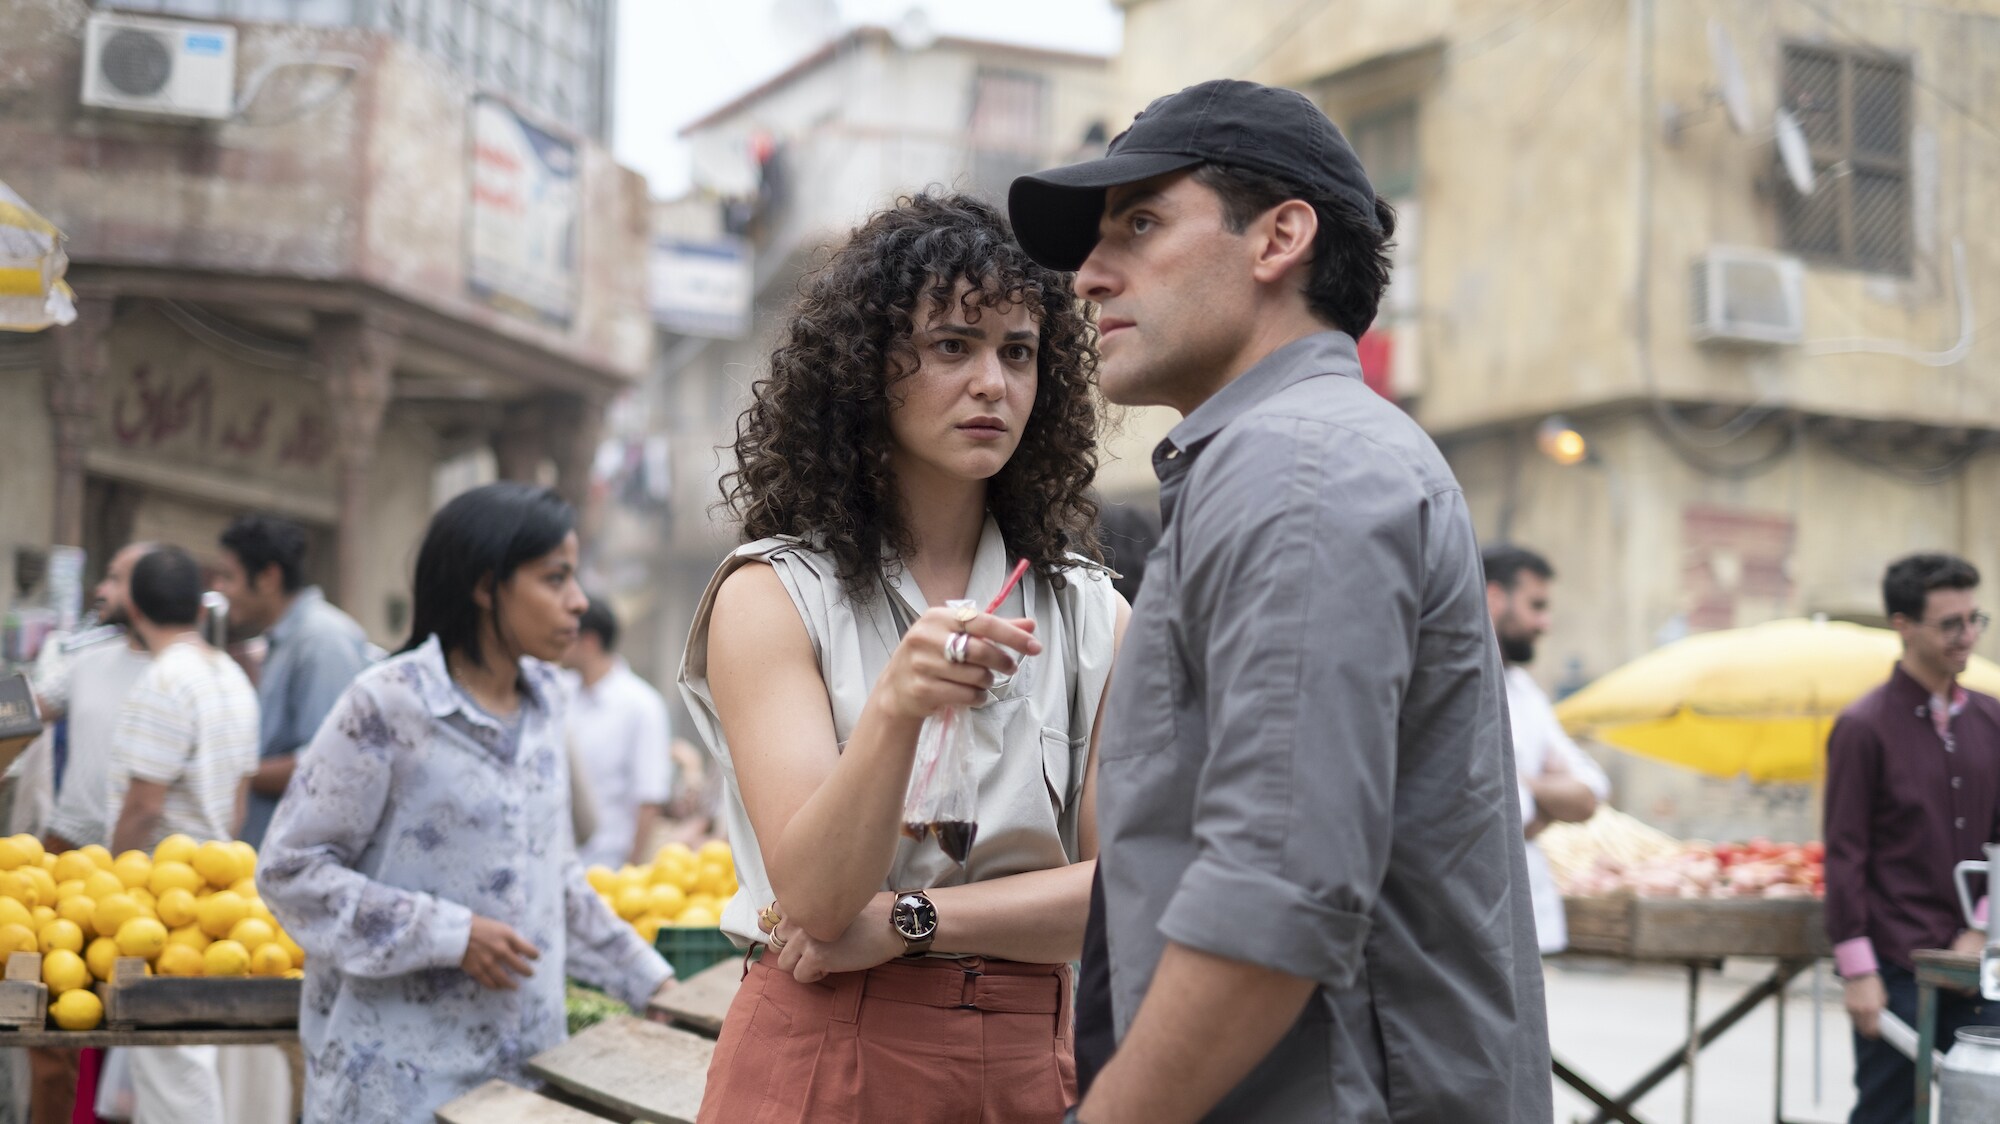 (L-R): May Calamawy as Layla El-Faouly and Oscar Isaac as Marc Spector/Steven Grant in Marvel Studios' MOON KNIGHT. Photo by Gabor Kotschy. ©Marvel Studios 2022. All Rights Reserved.